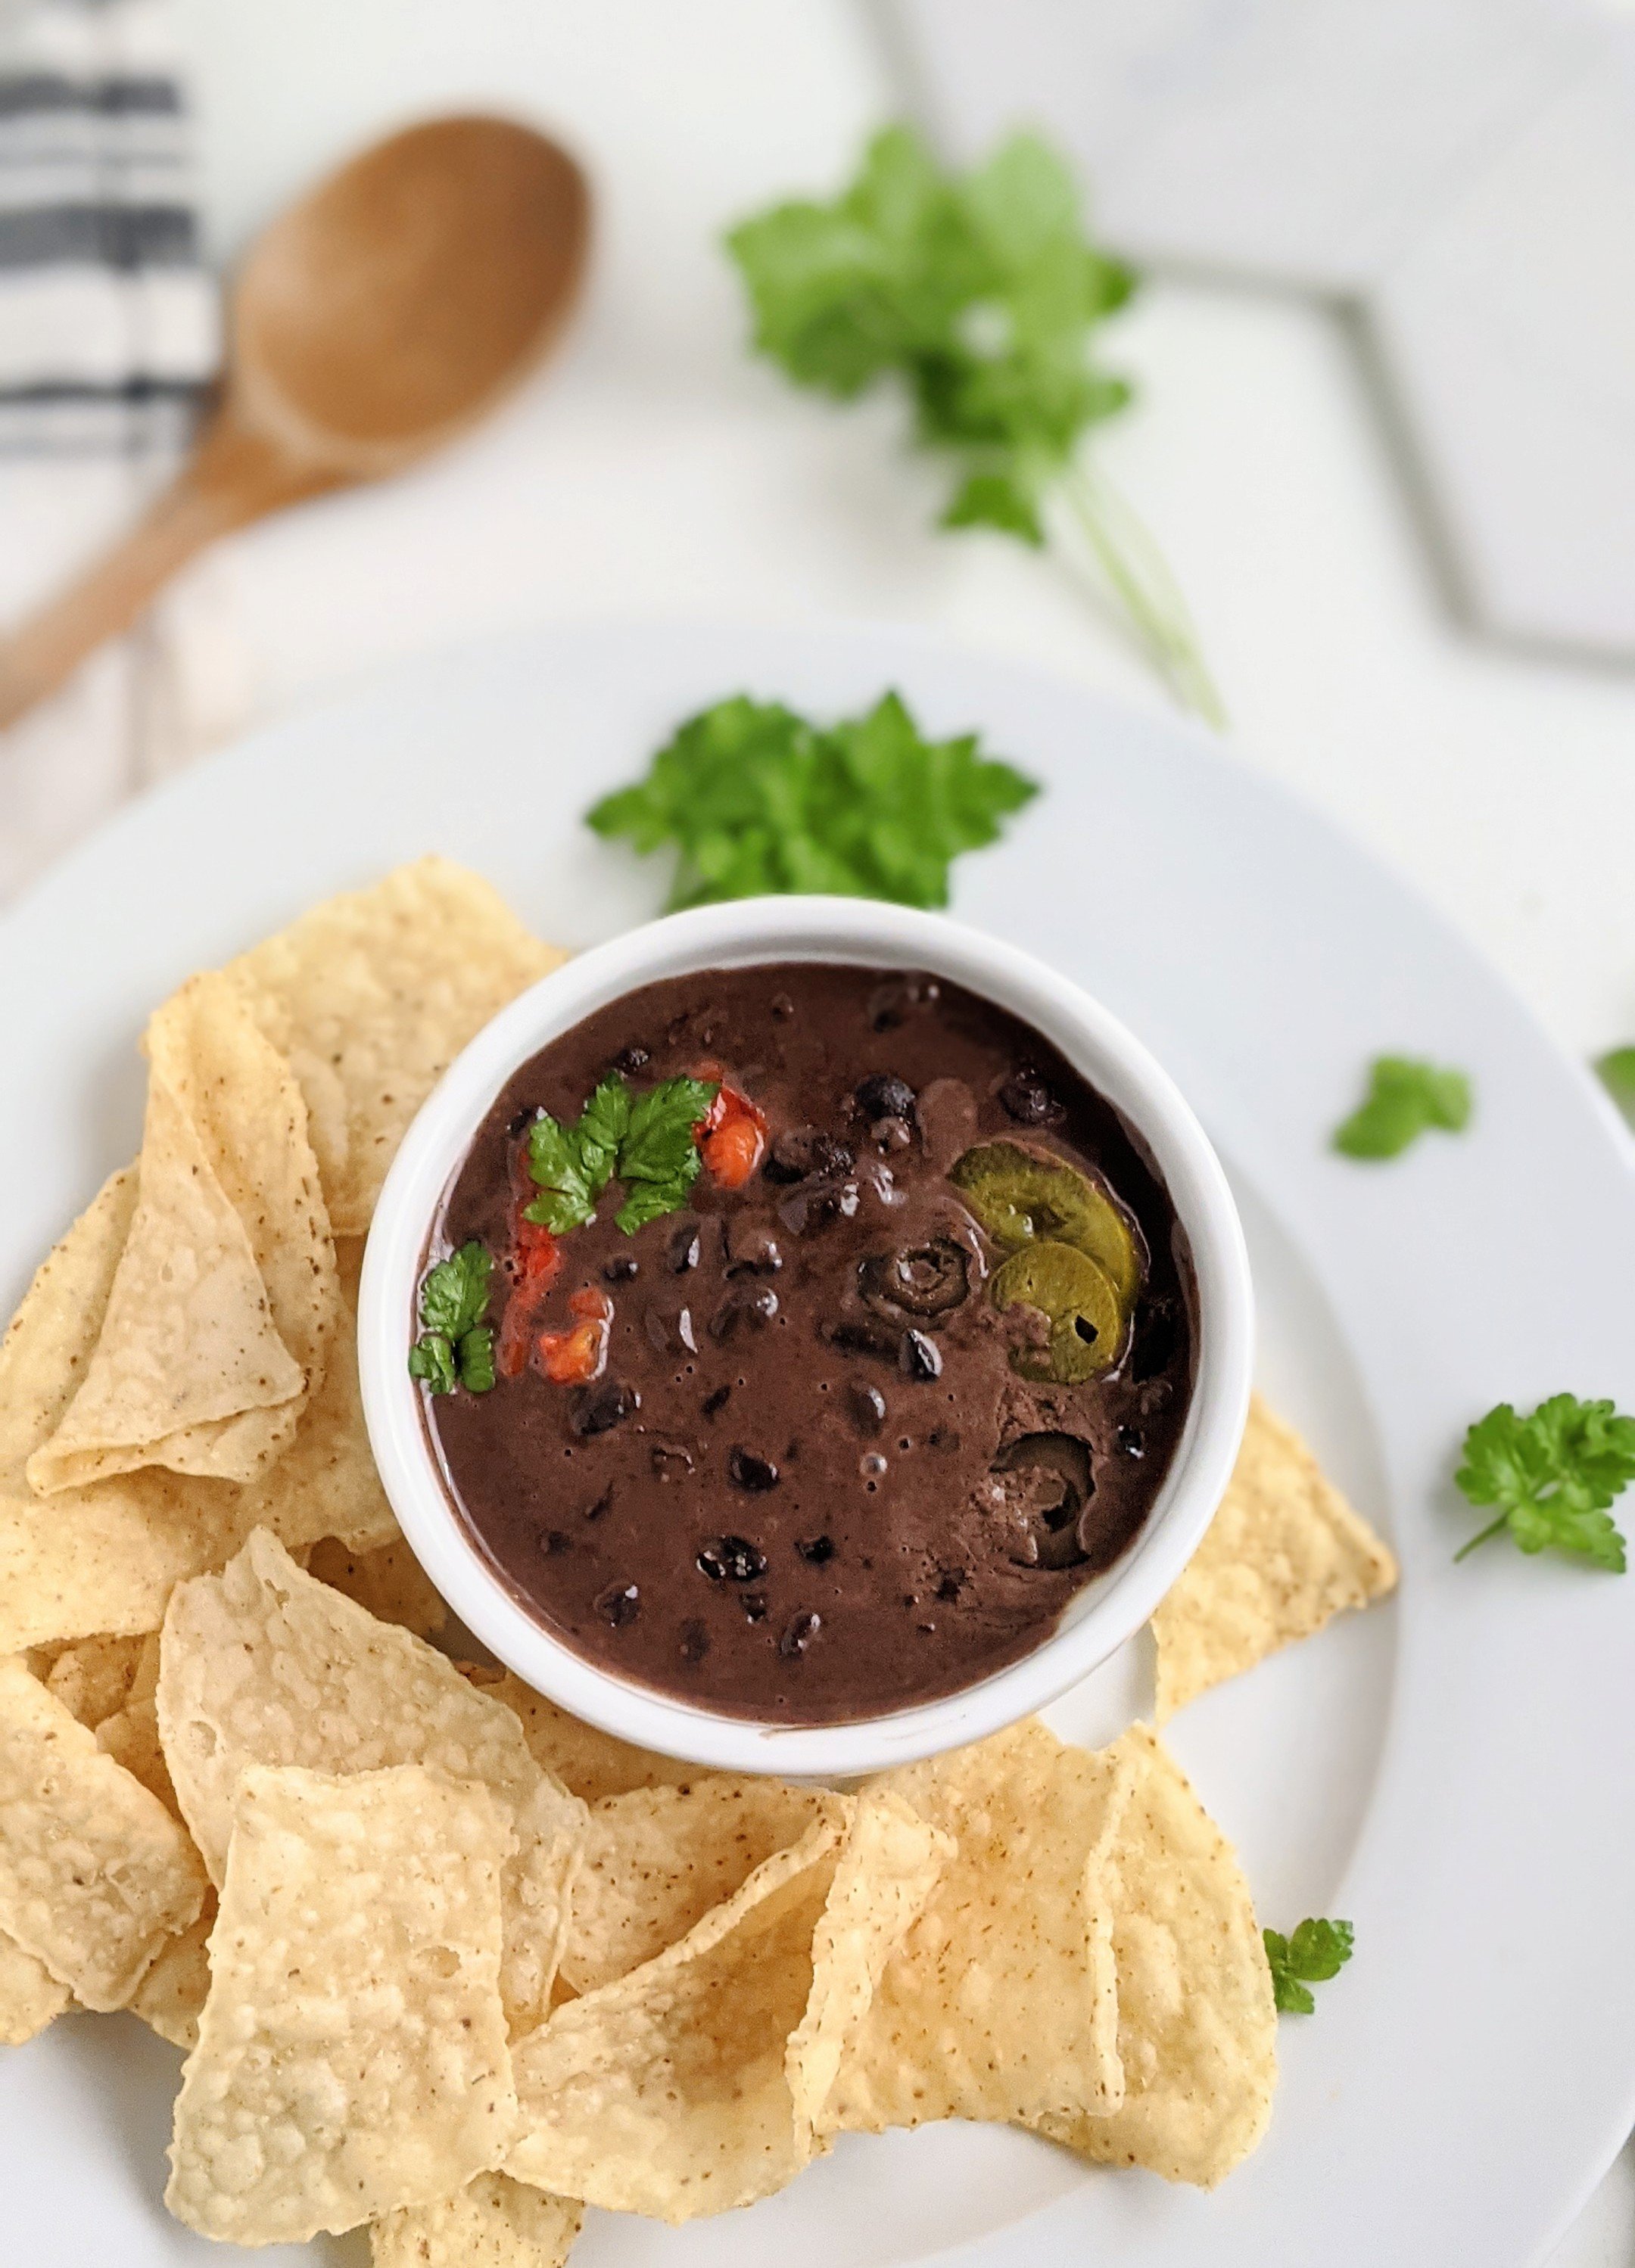 vegetarian queso dip recipe for game day super bowl party appetizers for football games heaalthy vegetarian gluten free vegan option plant based veggie dip recipes with cheese